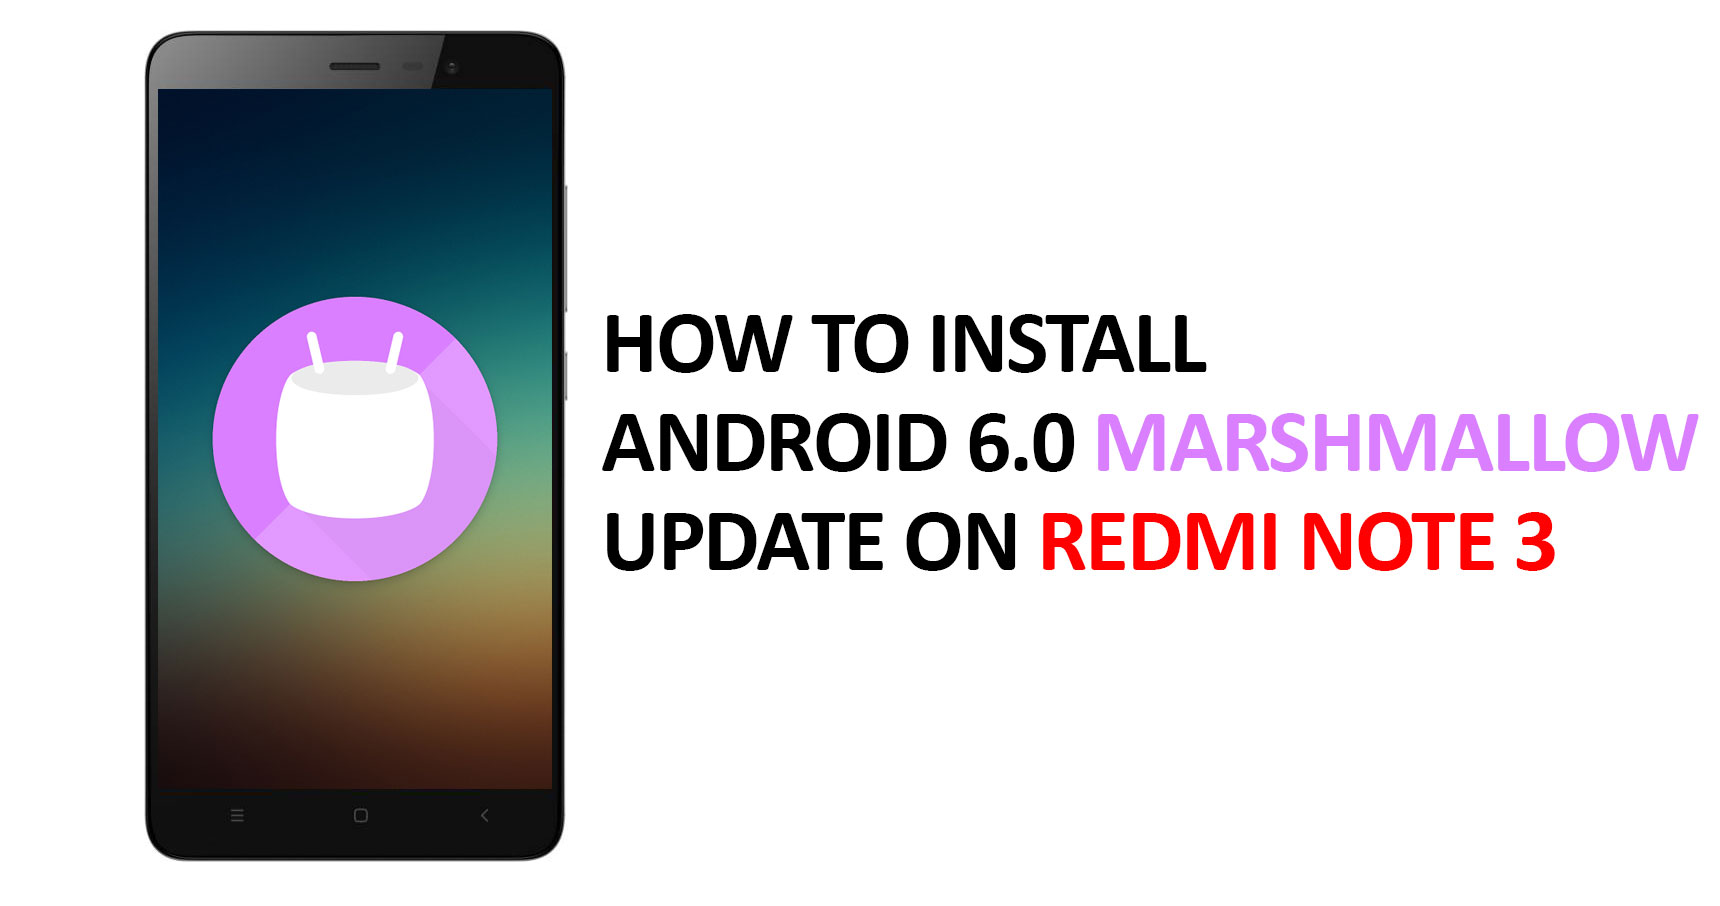 steps to install marshmallow redmi note 3